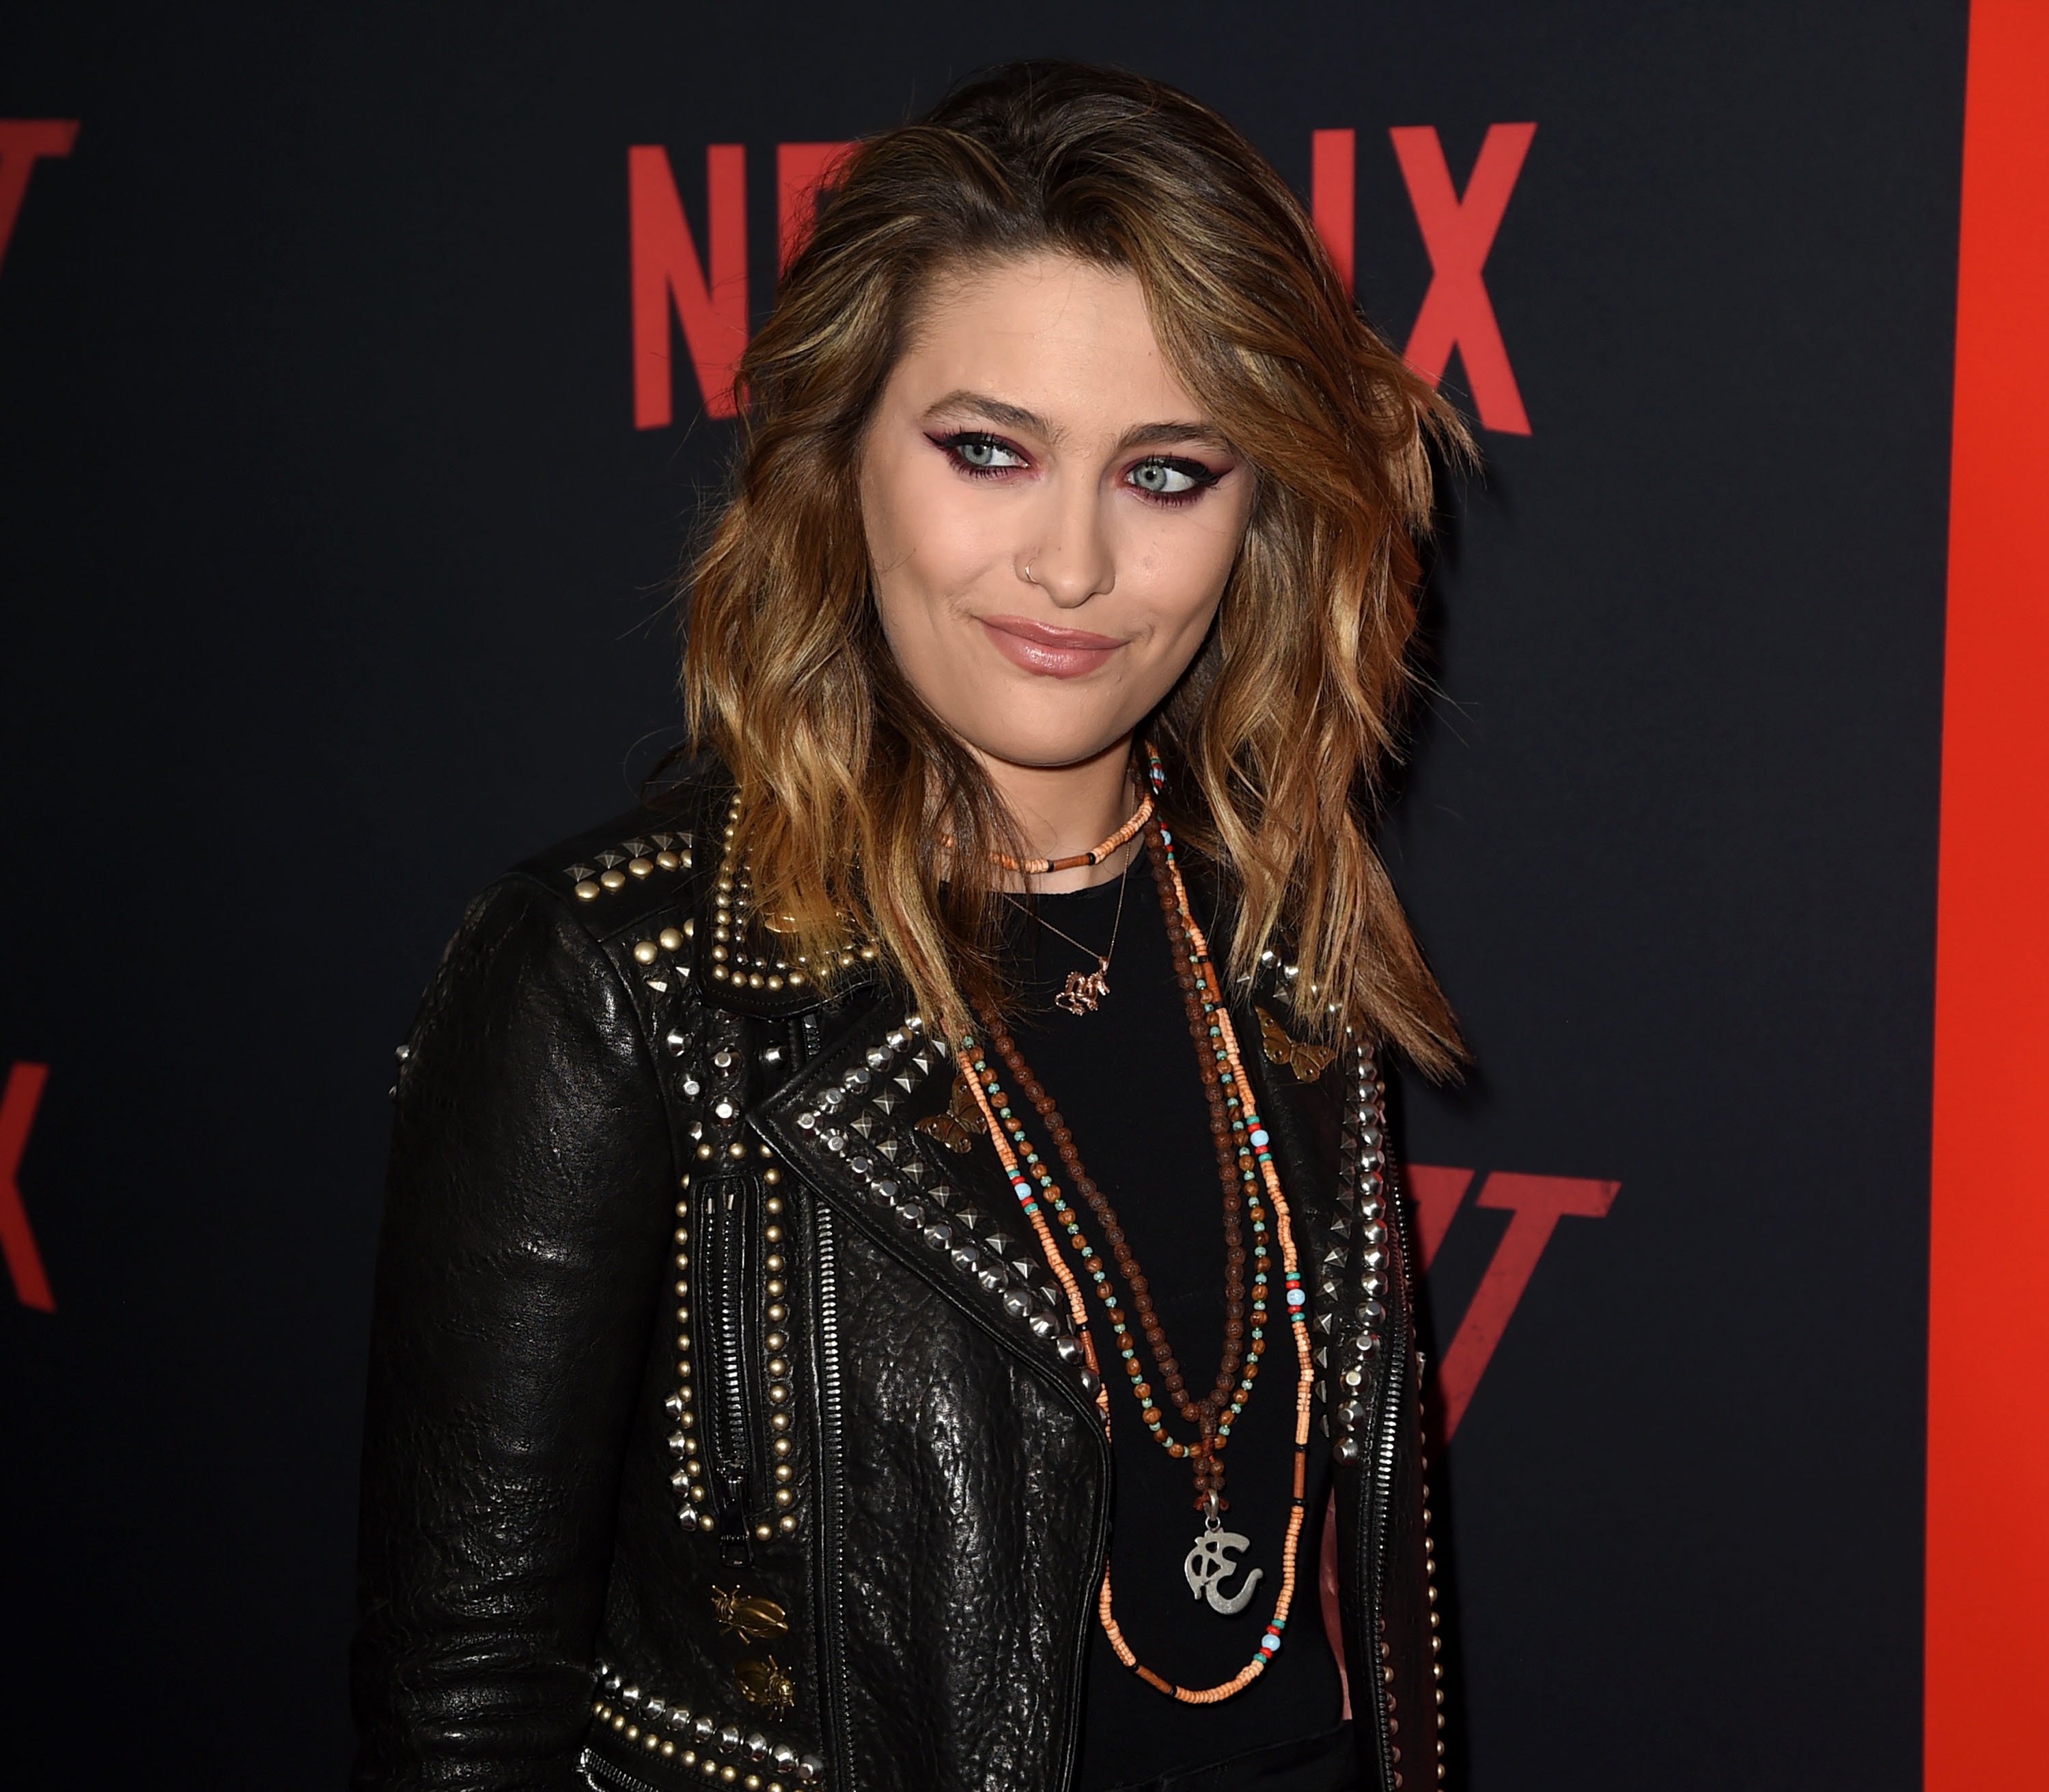 Paris Jackson attends Netflix's "Dirt" event in March 2019 | Photo: Getty Images